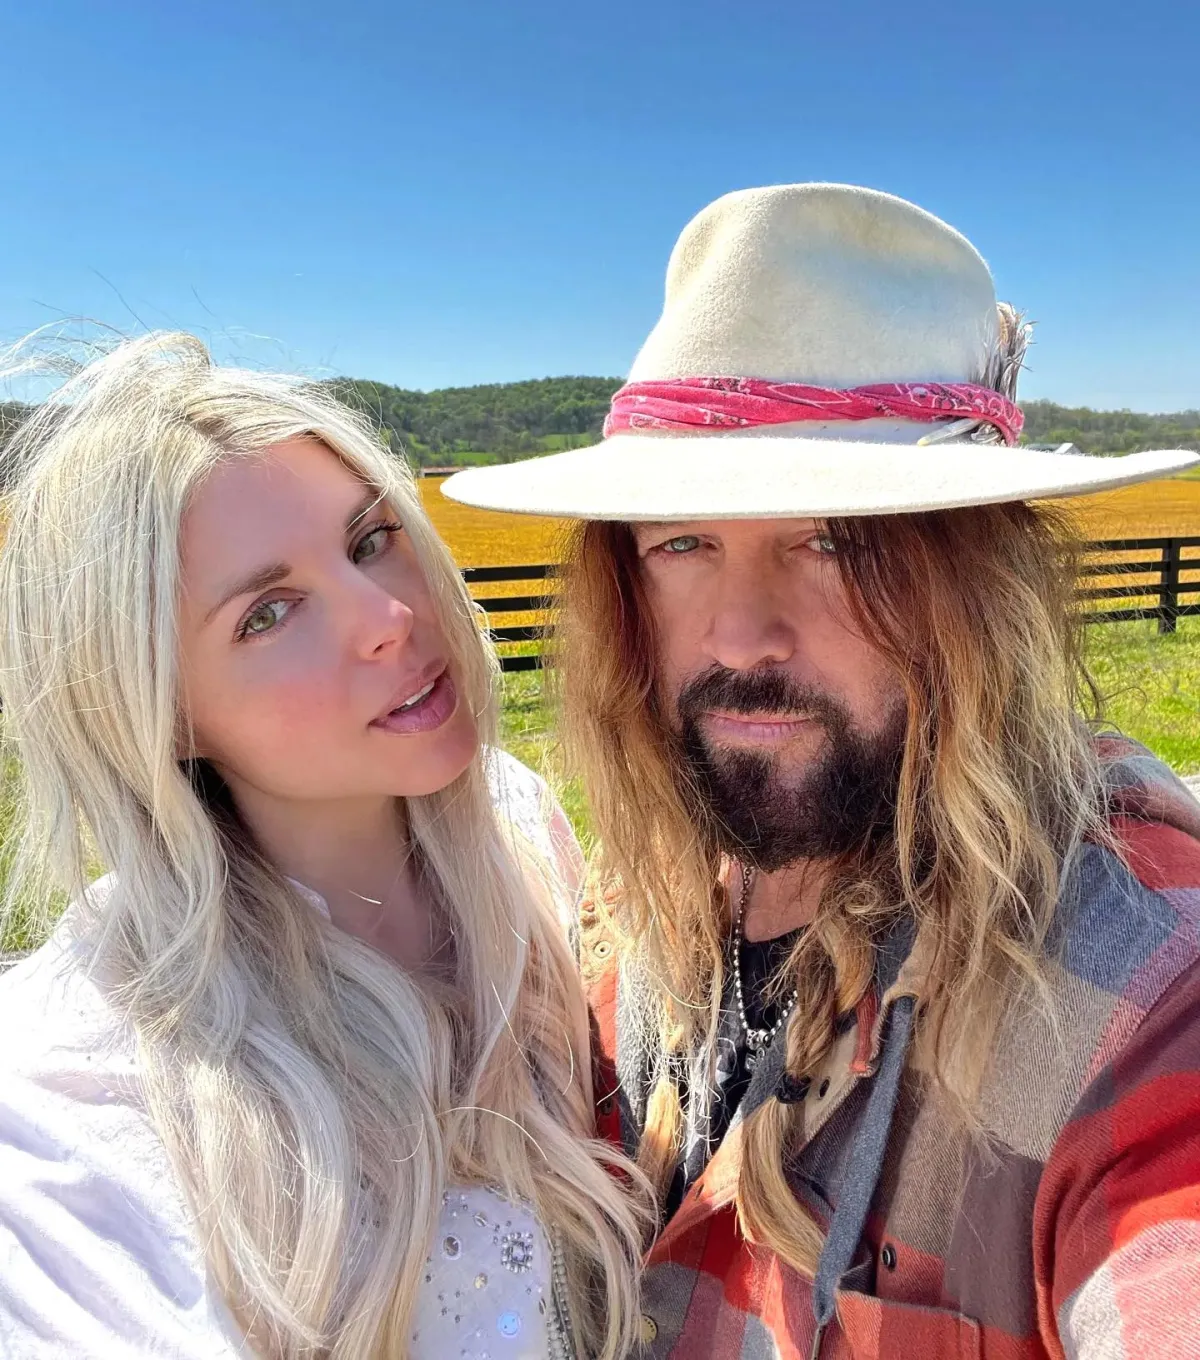 Billy Ray Cyrus Gave Firerose Just Two Days to Move Out Amid Divorce Filing